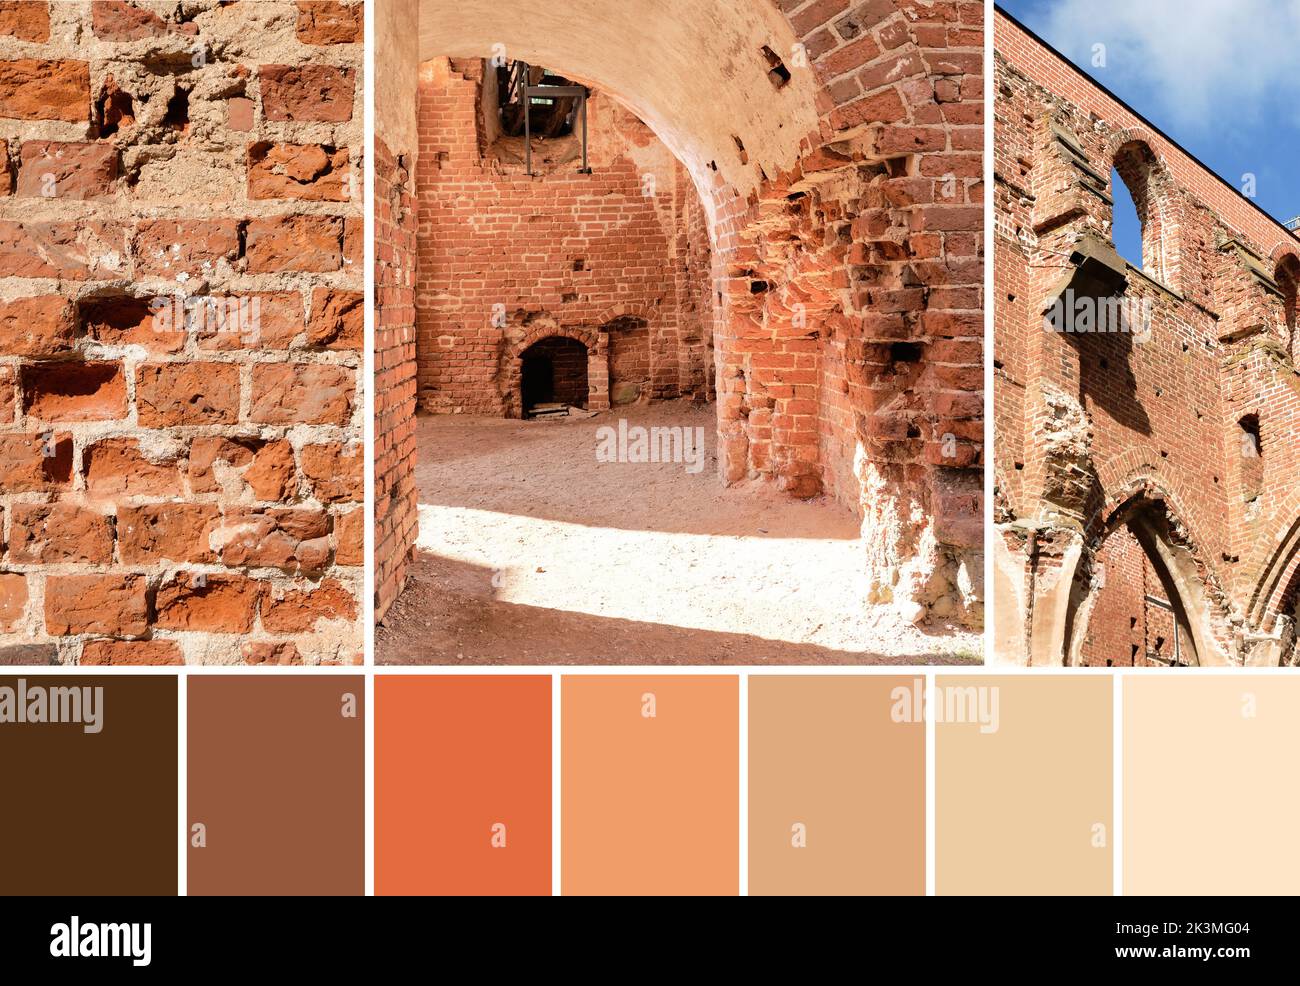 Orange and beige color matching palette from image of old brick walls. Ruins of historic Karkna abbey, cathedral in Tartu, Estonia on a sunny day. Stock Photo